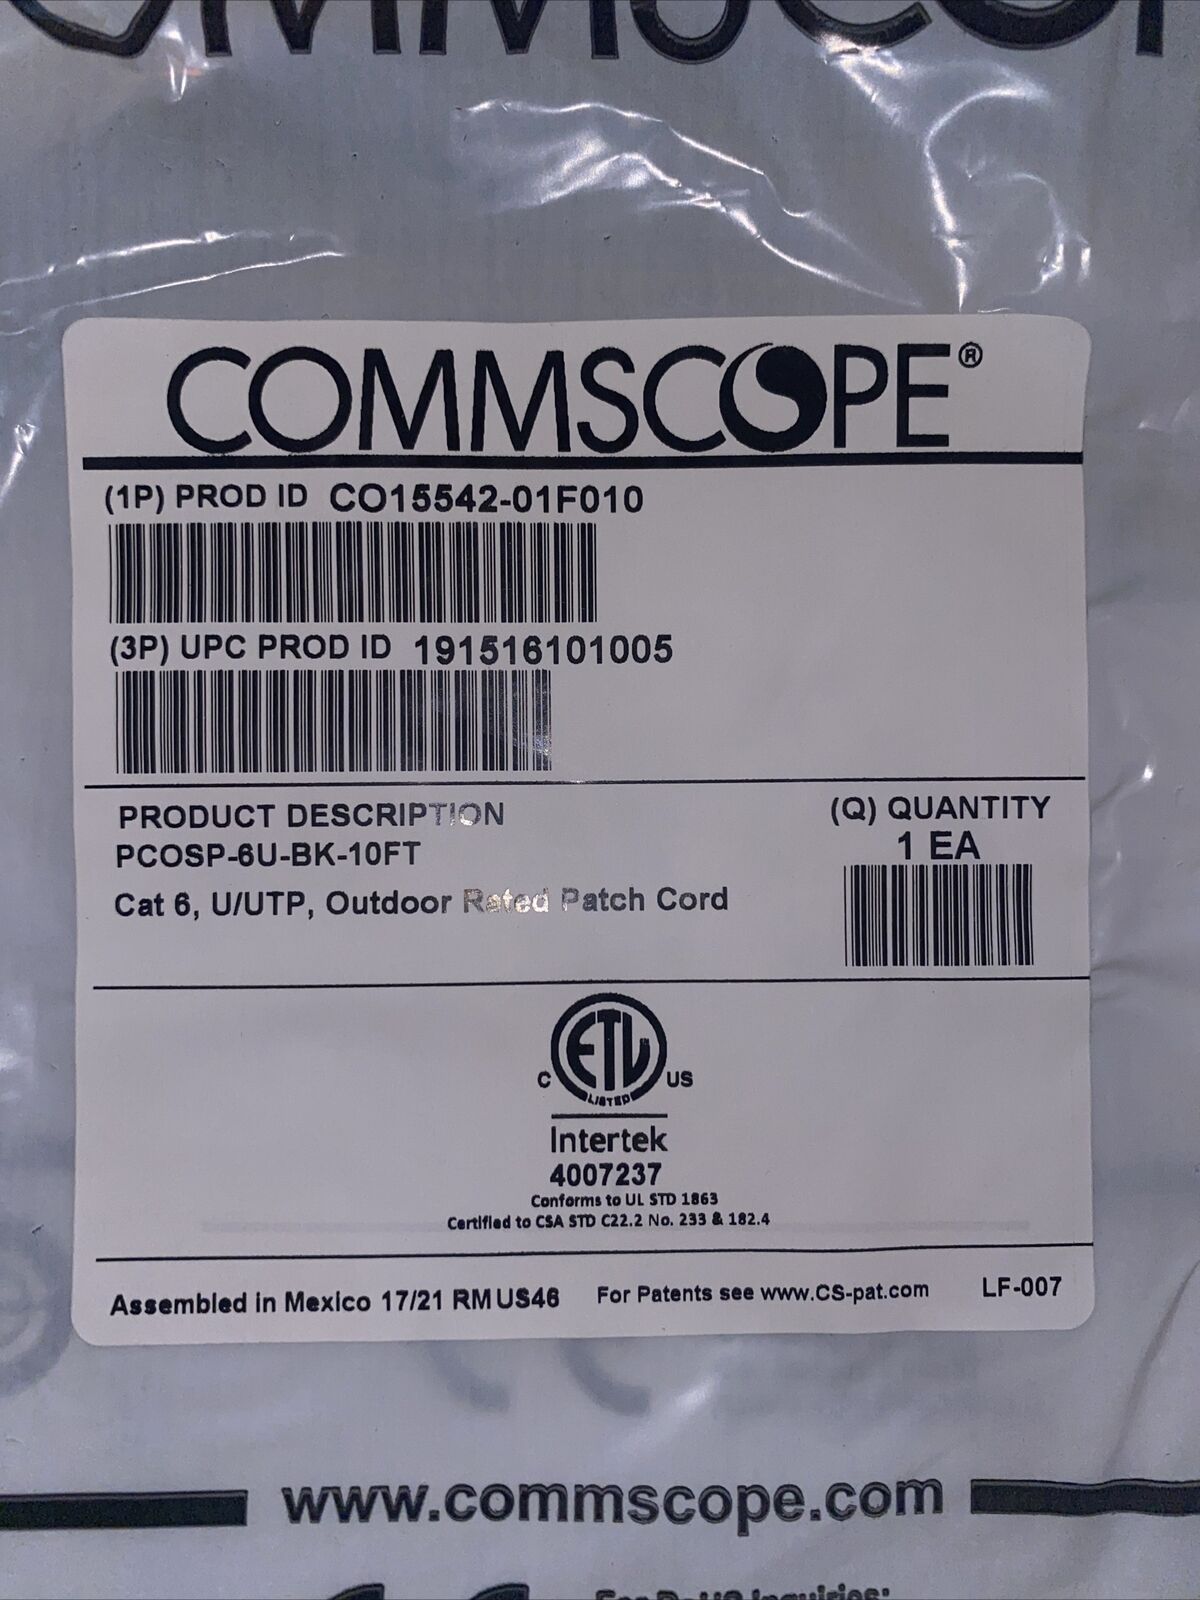 NEW-(LOt OF36)Commscope - Cat 6, U/UTP,Outdoor Rated Patch Cord PCOSP-6U-BK-10FT